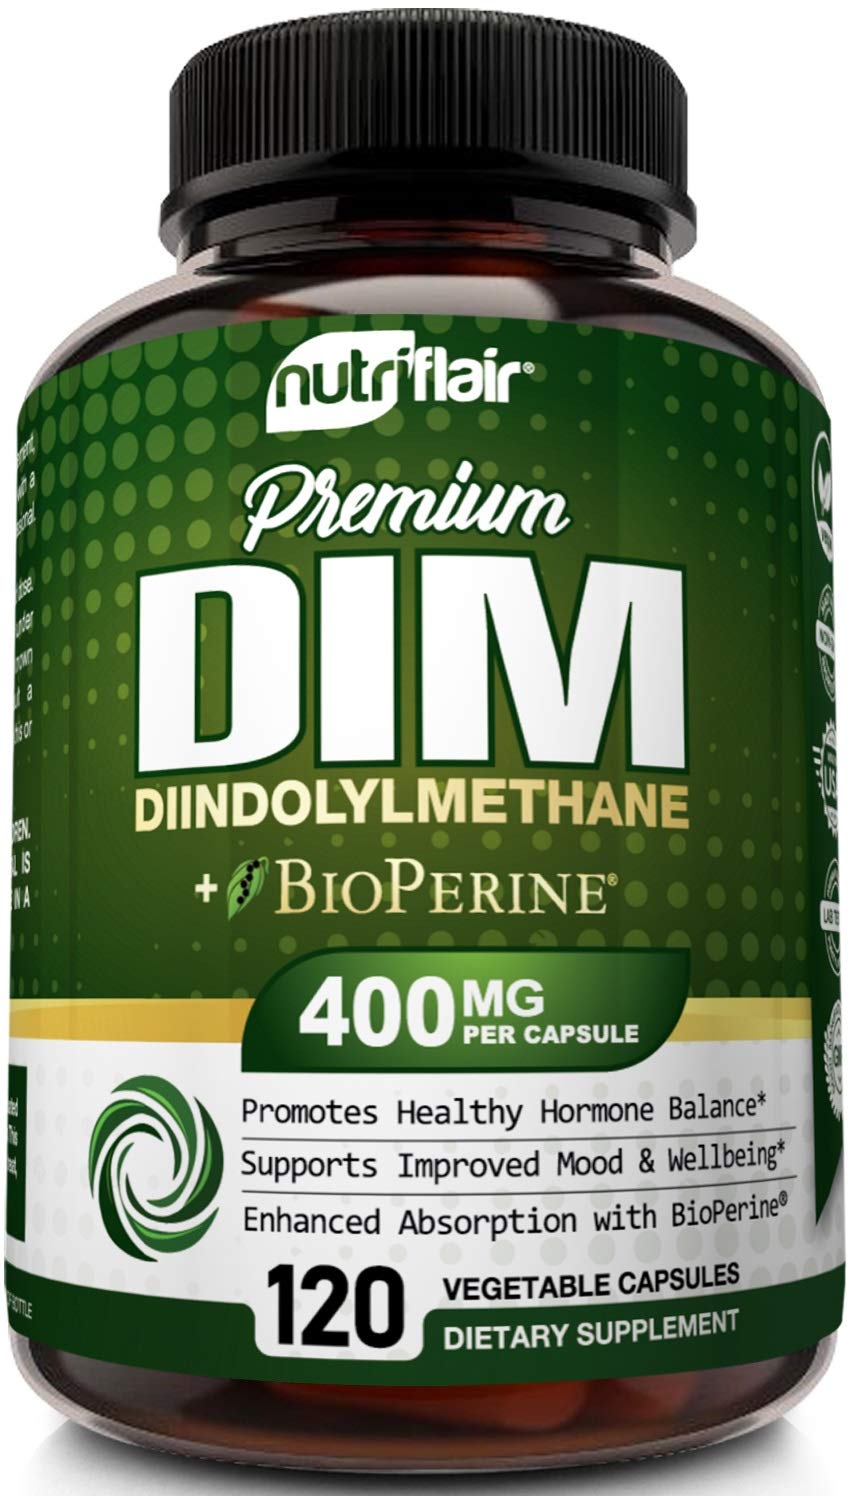 NutriFlair DIM Supplement 400mg with Bioperine, 120 Capsules -  Diindolylmethane - Estrogen Metabolism Support & Hormone Balance,  Menopause, PCOS, Acne and Skin Care for Men & Women - Compare to 300mg